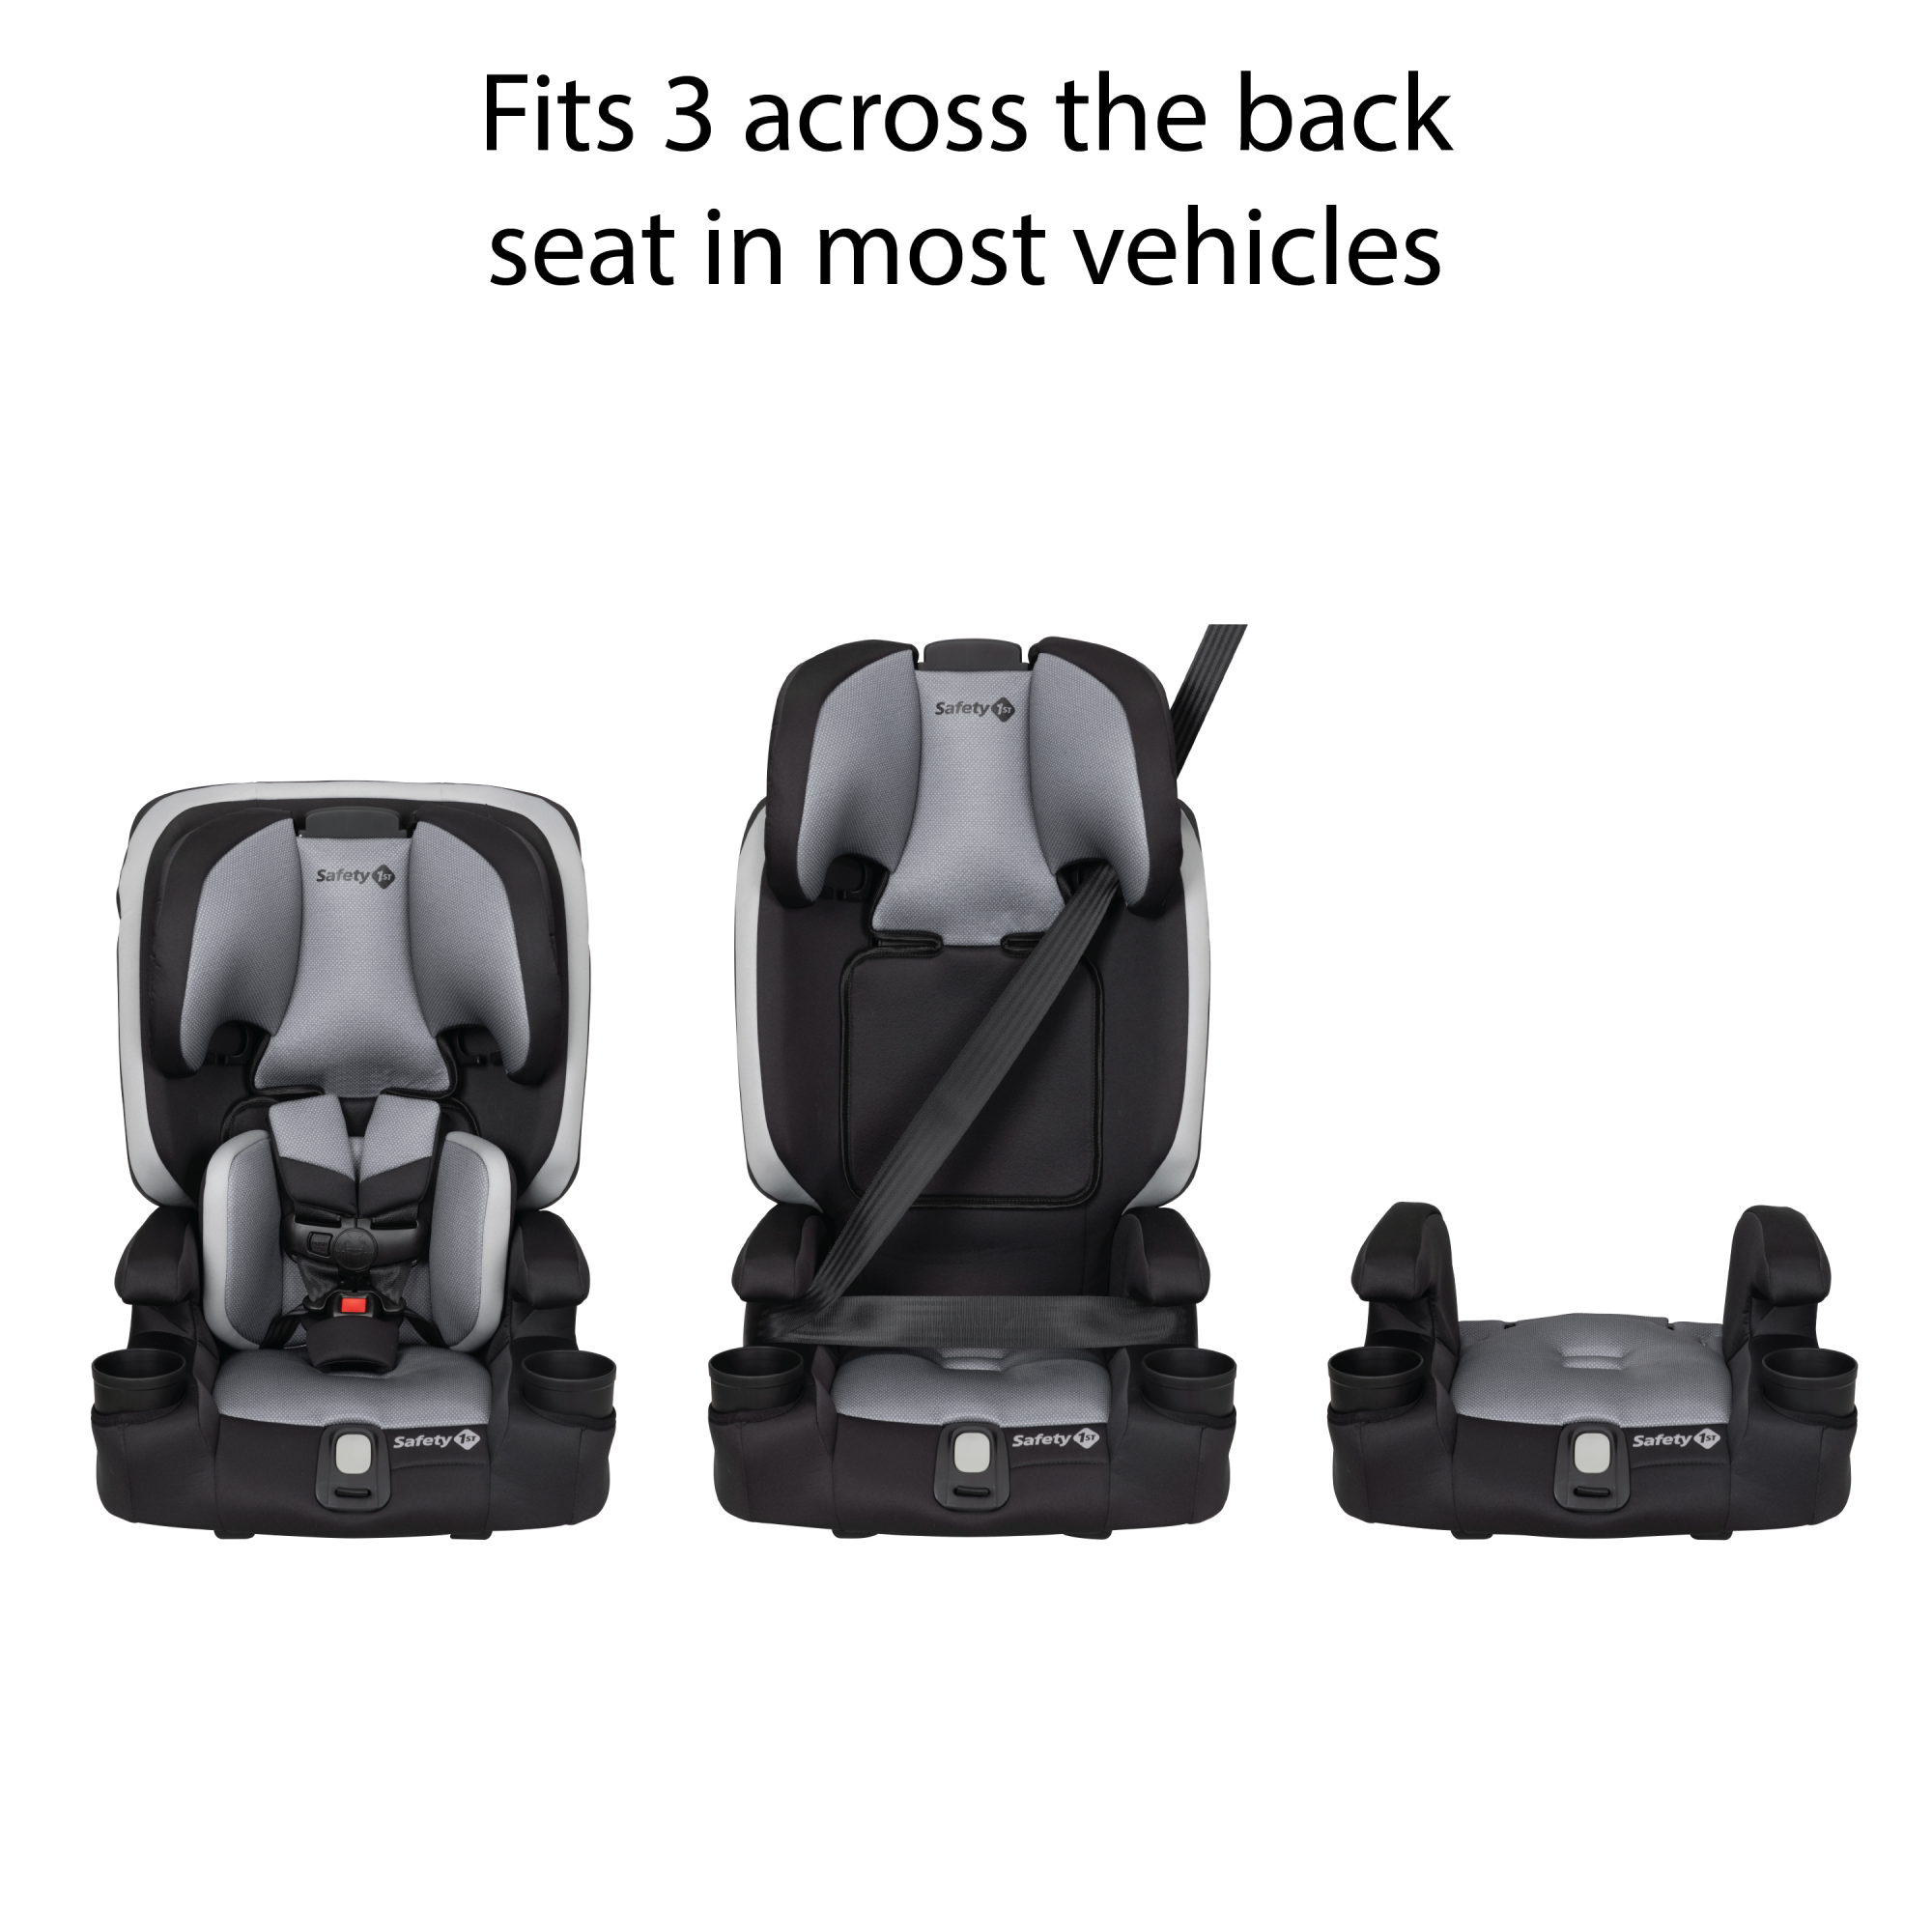 Boost-and-Go All-in-One Harness Booster Car Seat - lightweight and easy to move from car to car